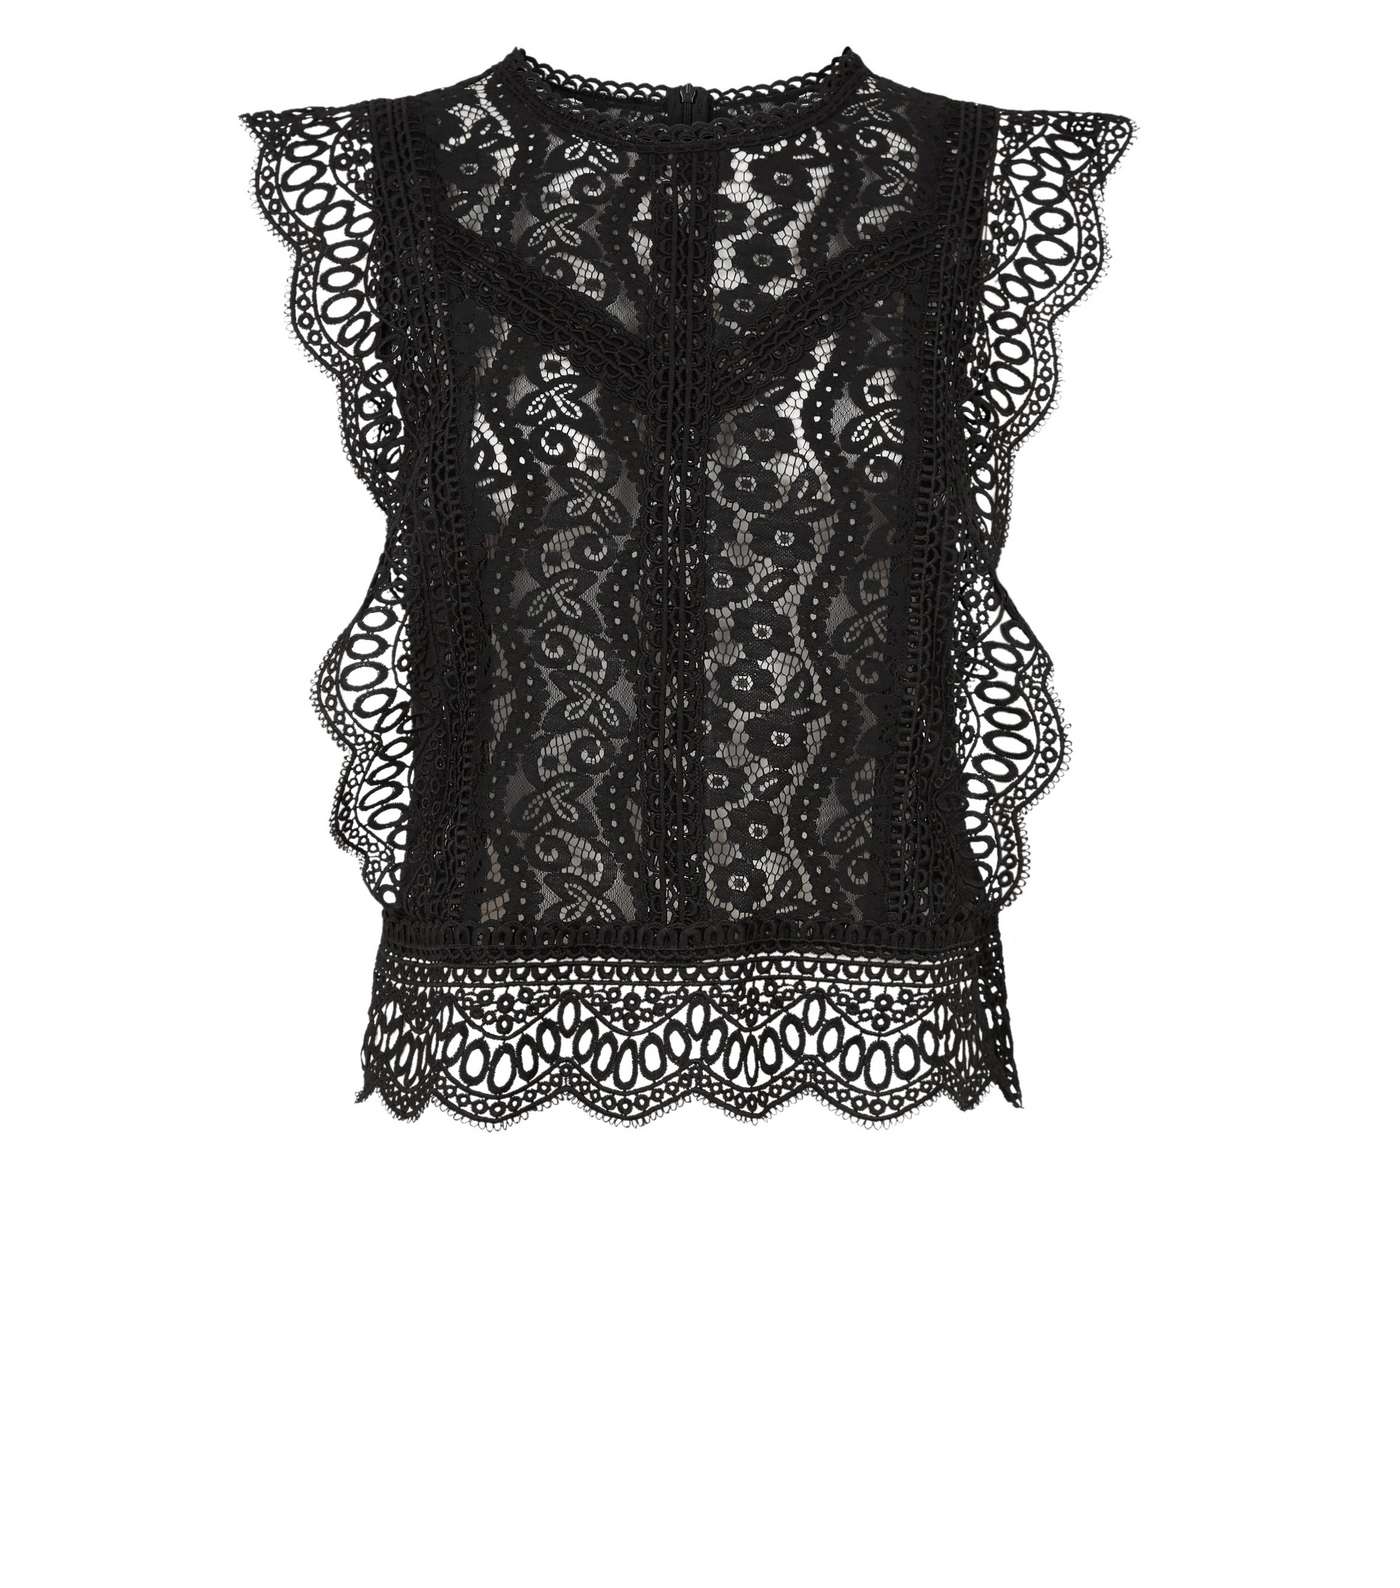 Cameo Rose Black Crochet Lace Top Image 4